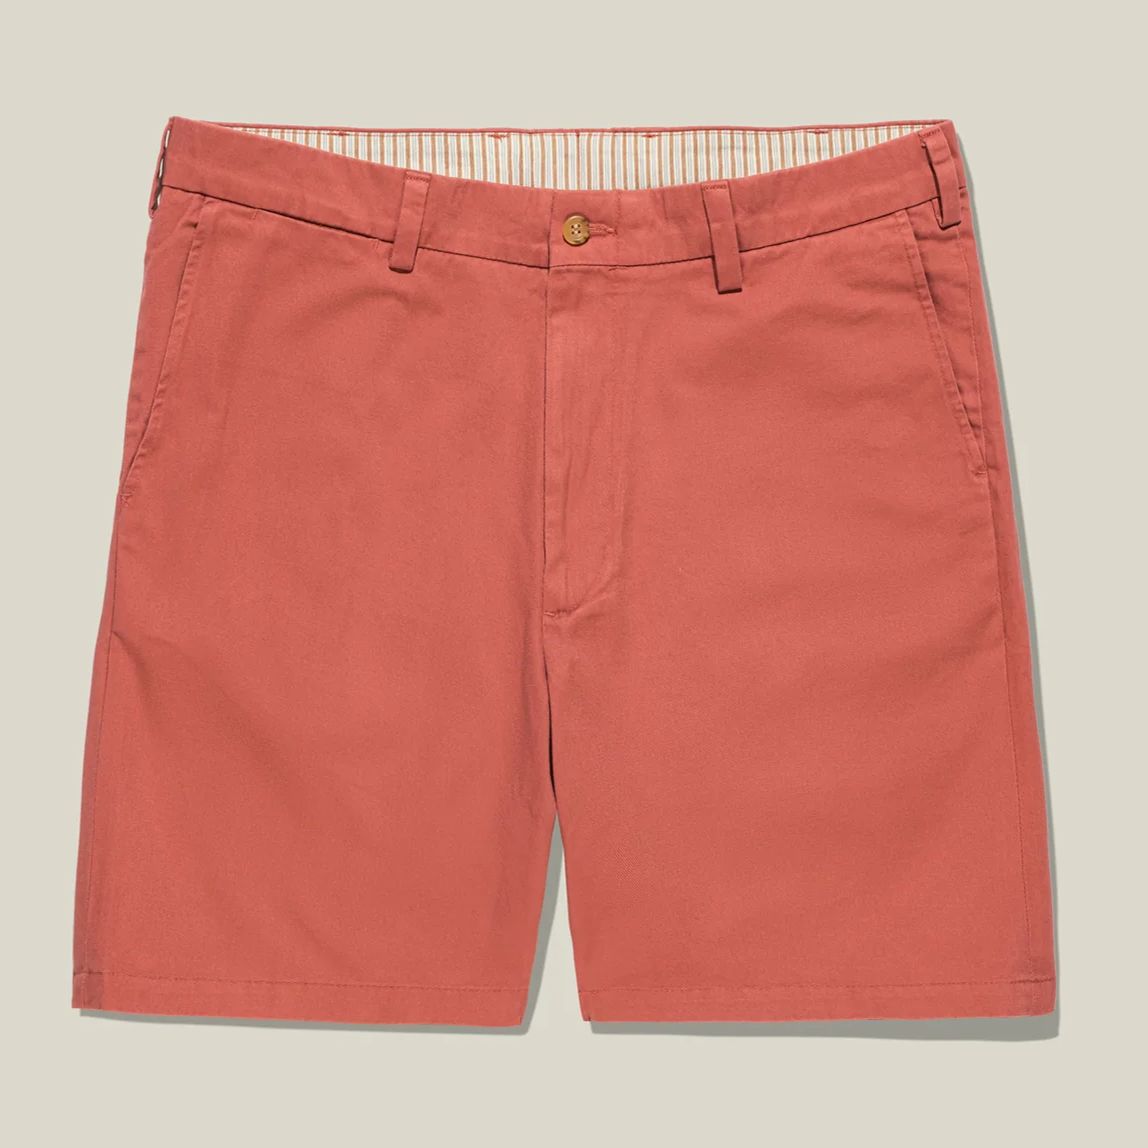 M2 Classic Fit Vintage Twill Shorts in Weathered Red by Bills Khakis